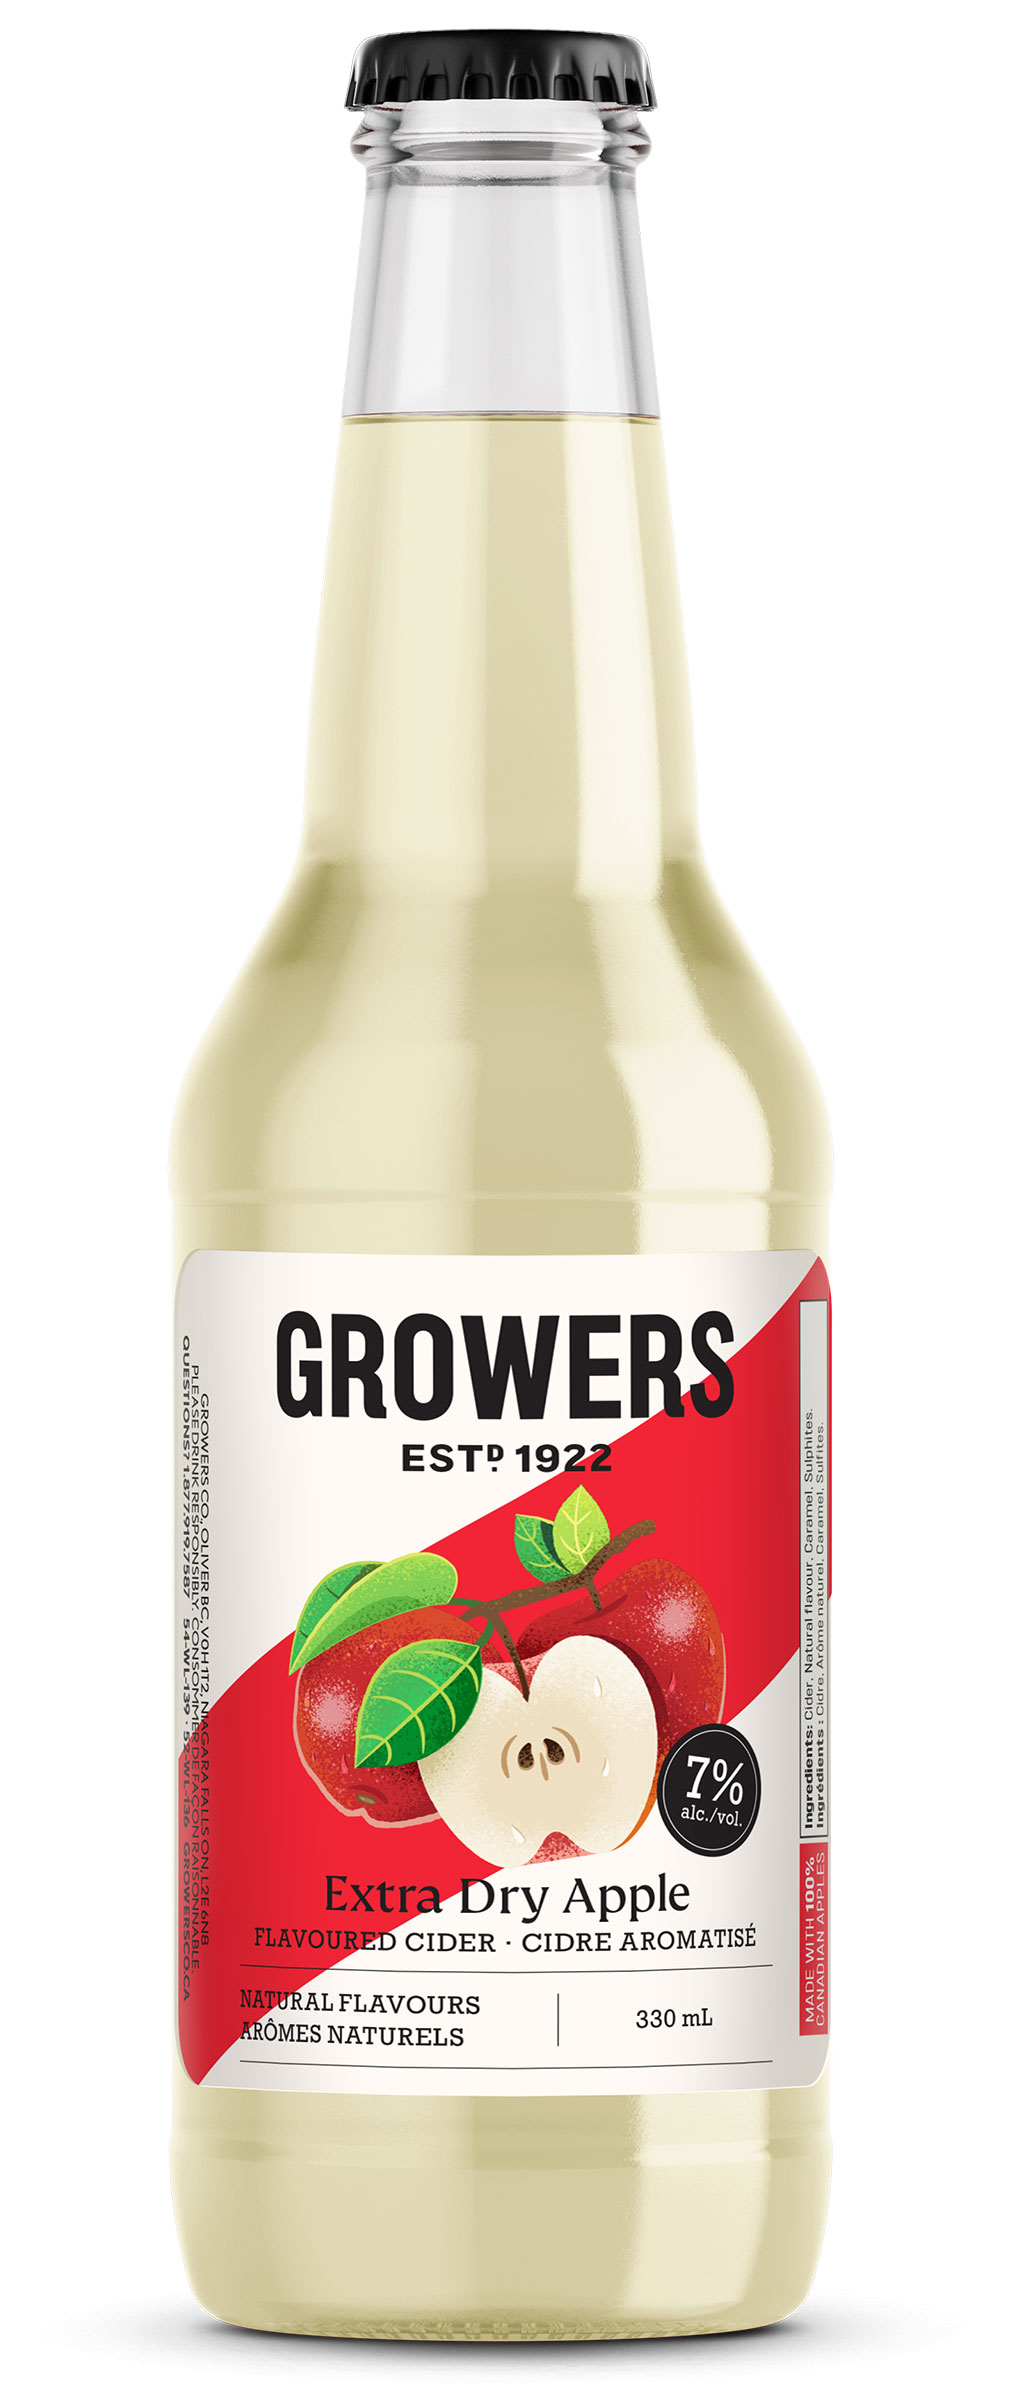 Bottle of Extra Dry Apple Growers Cider